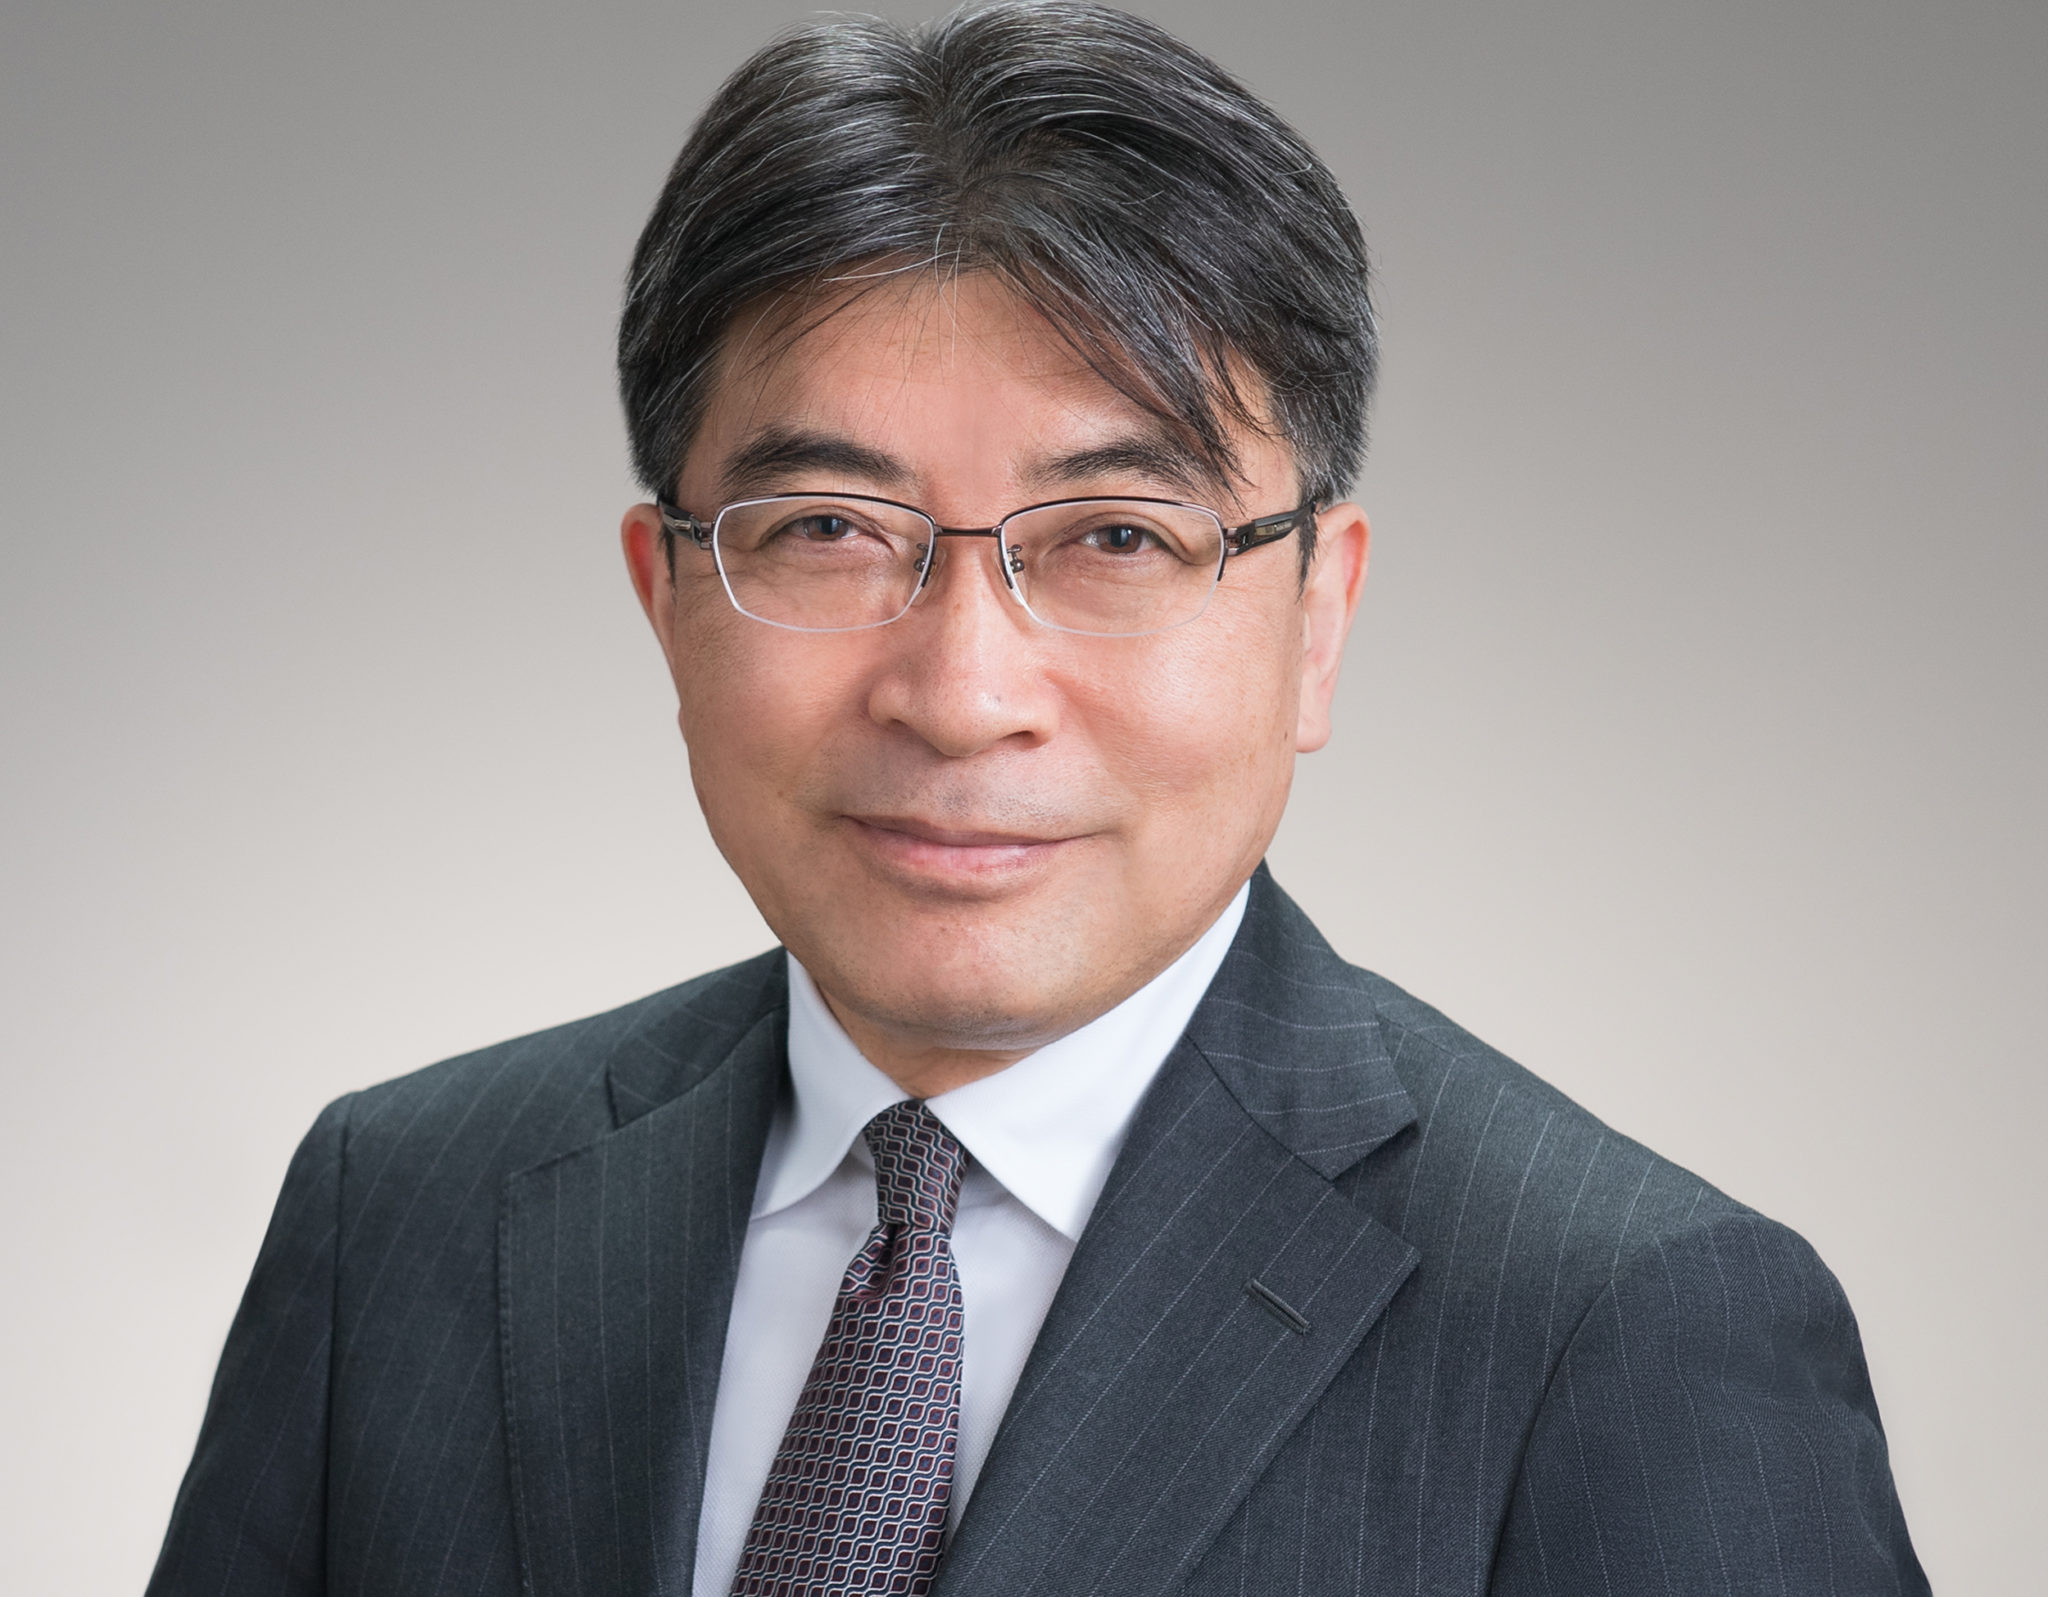 Akio Naito, who launched Grand Seiko in America, lands role as worldwide  president for Seiko Watch Corporation